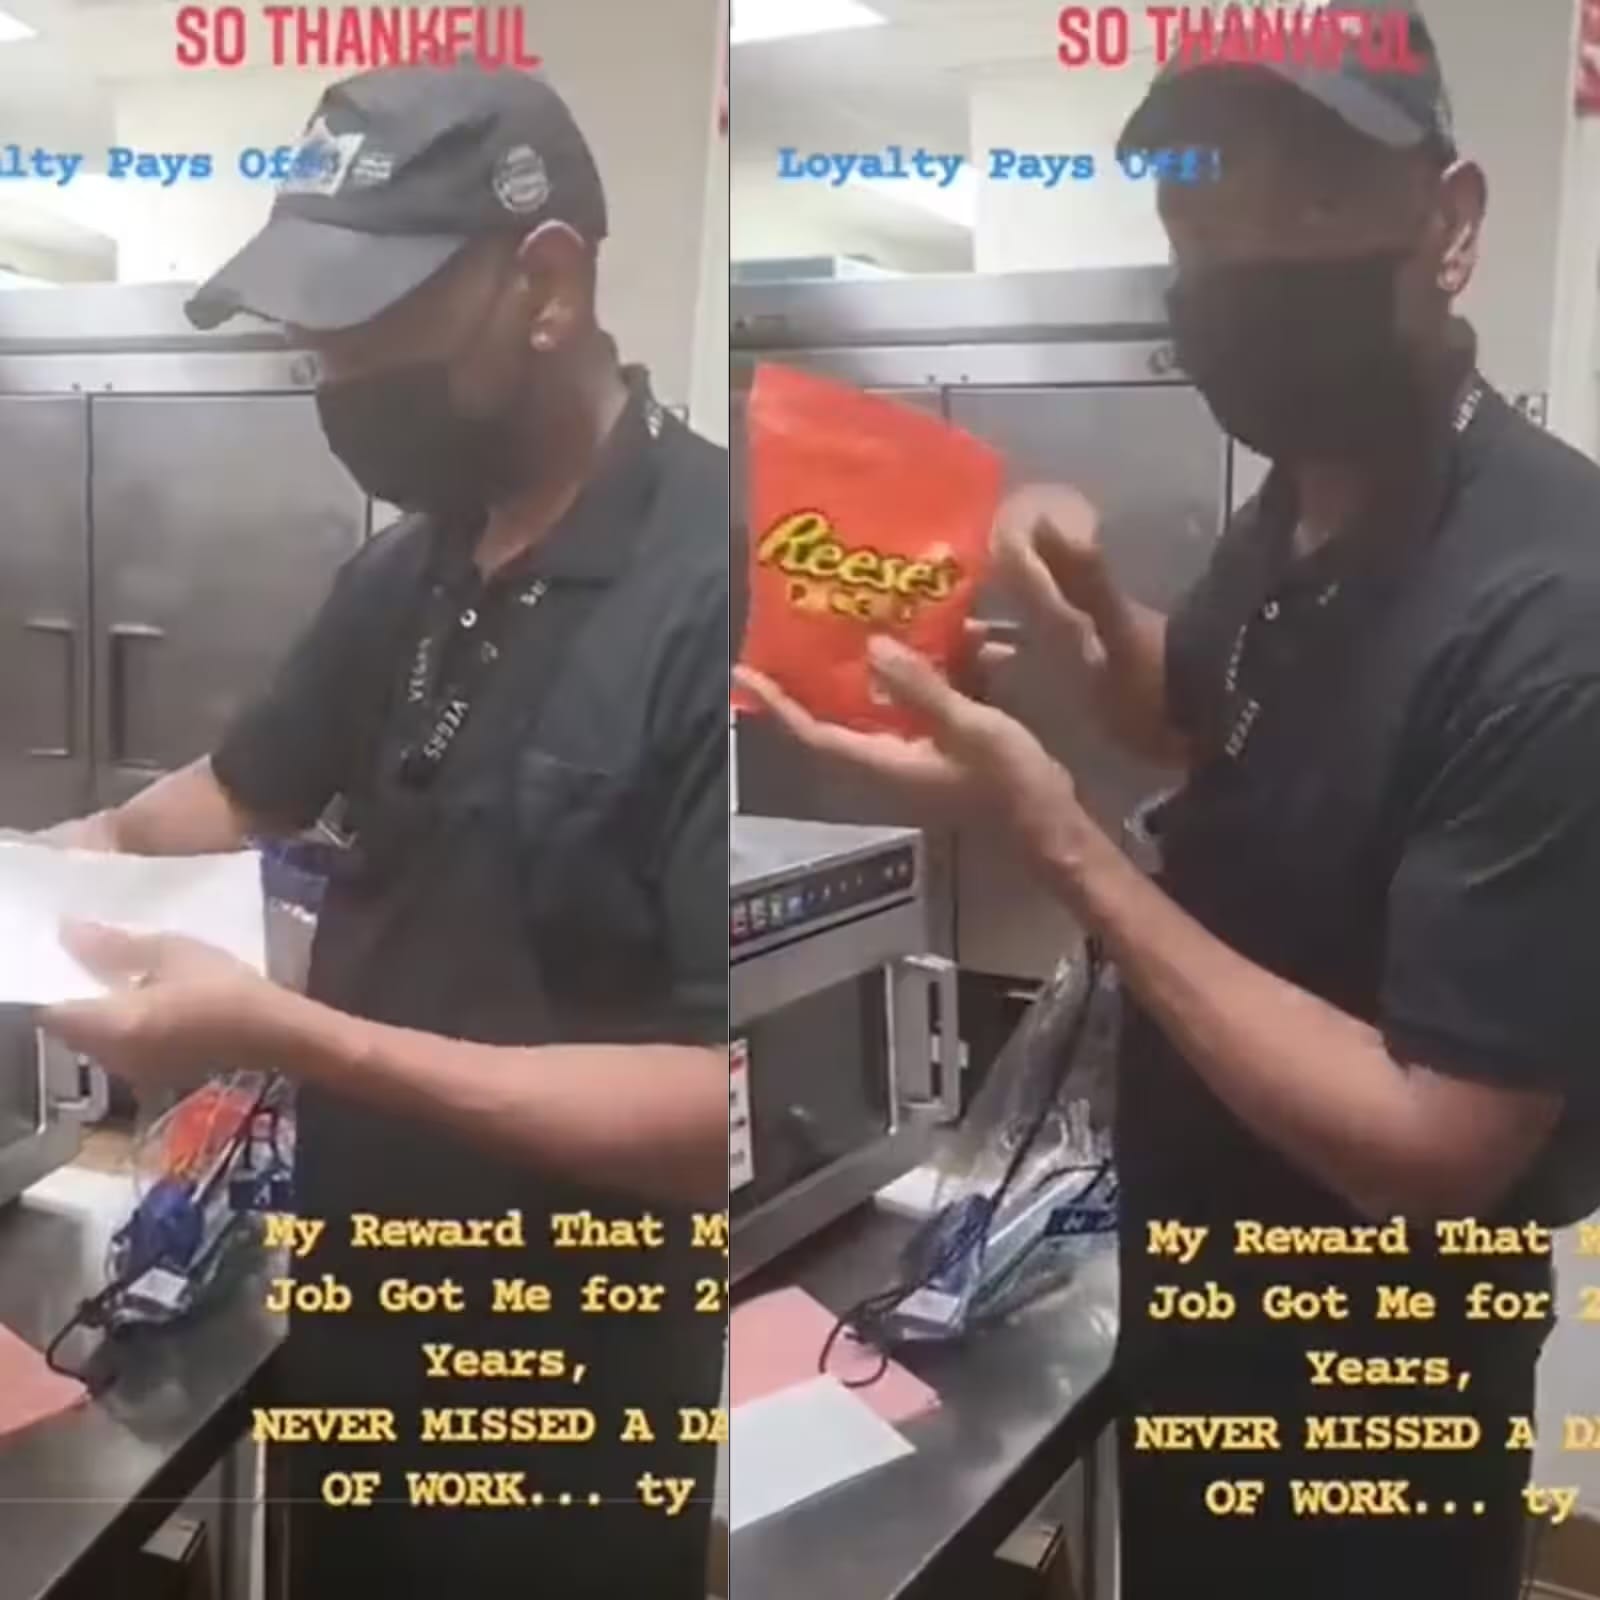 Burger King's Ungrateful 27-Year Goodie Bag Sparks Outrage in Viral Video